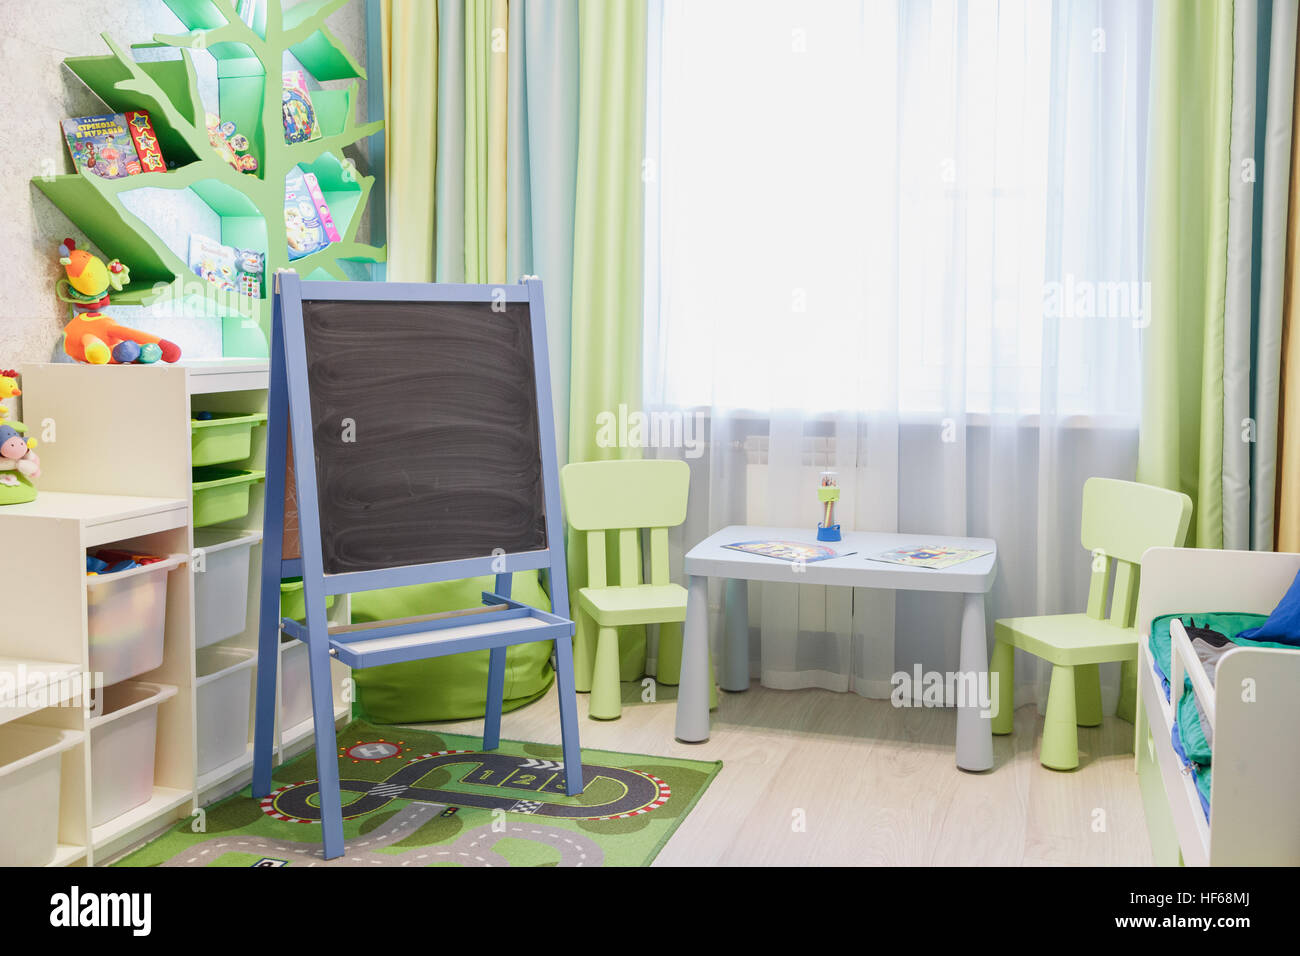 interior of kids playing room Stock Photo